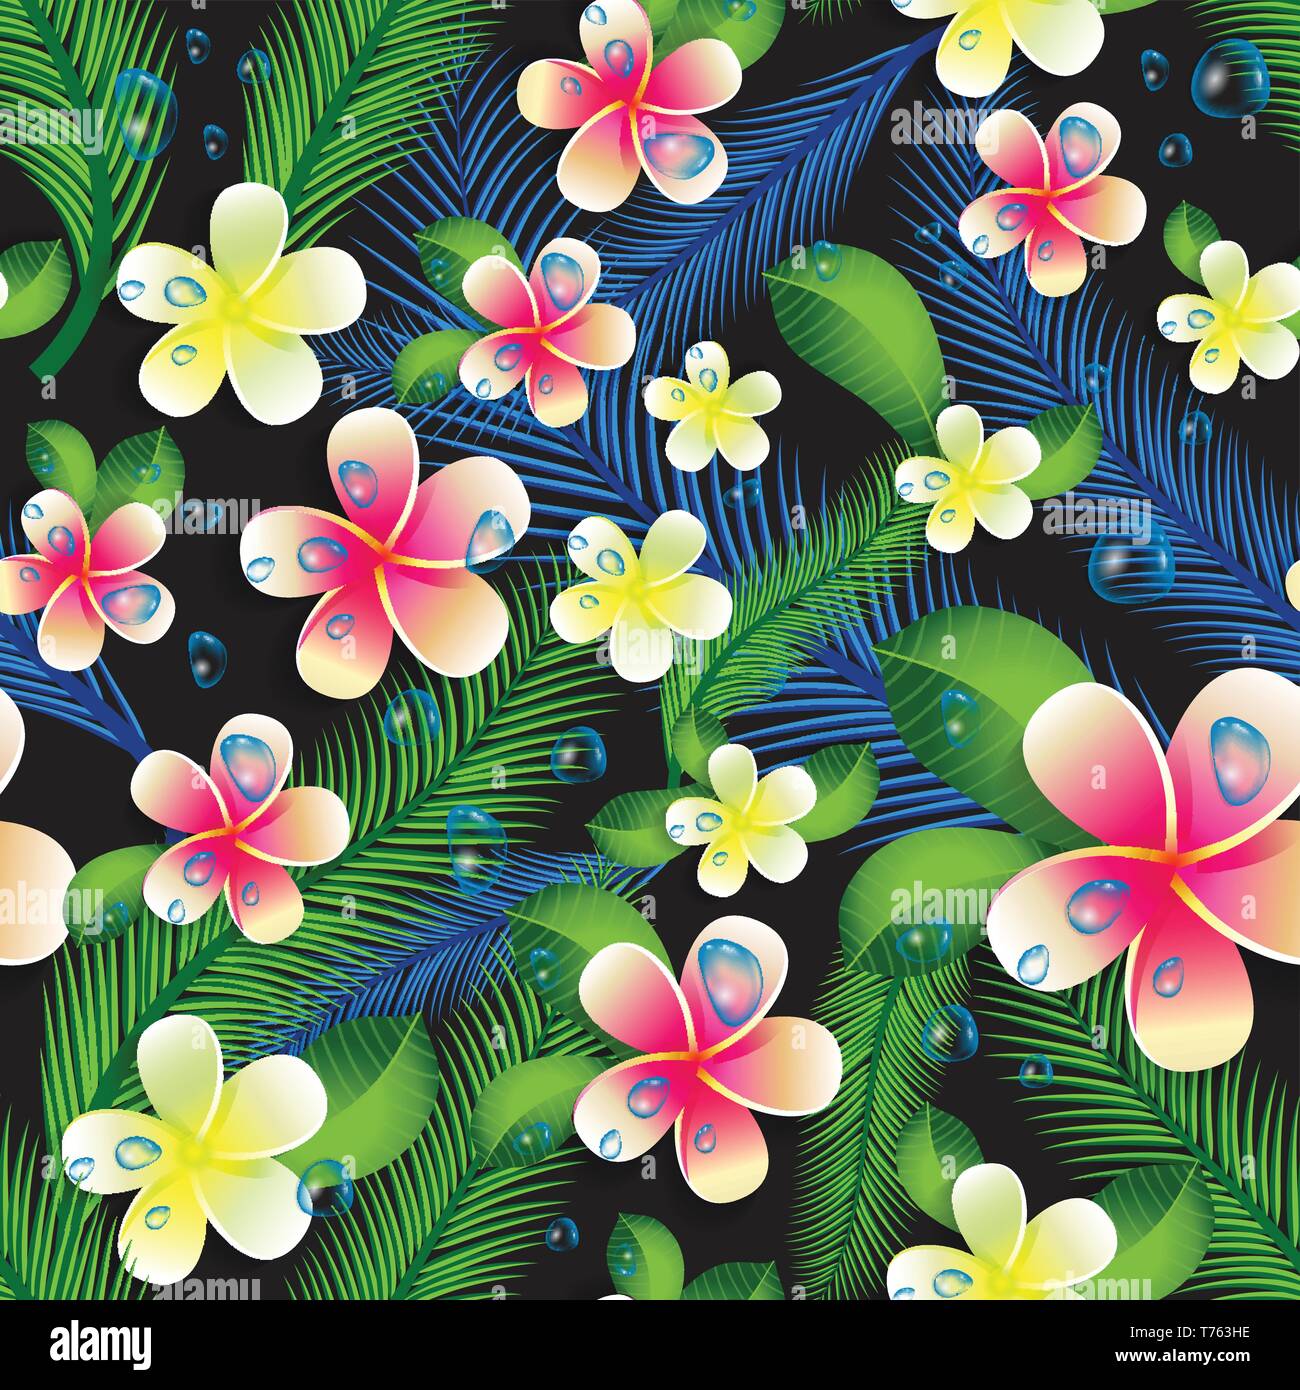 Beautiful seamless floral jungle pattern background. Tropical flowers and leaves. Stock Vector